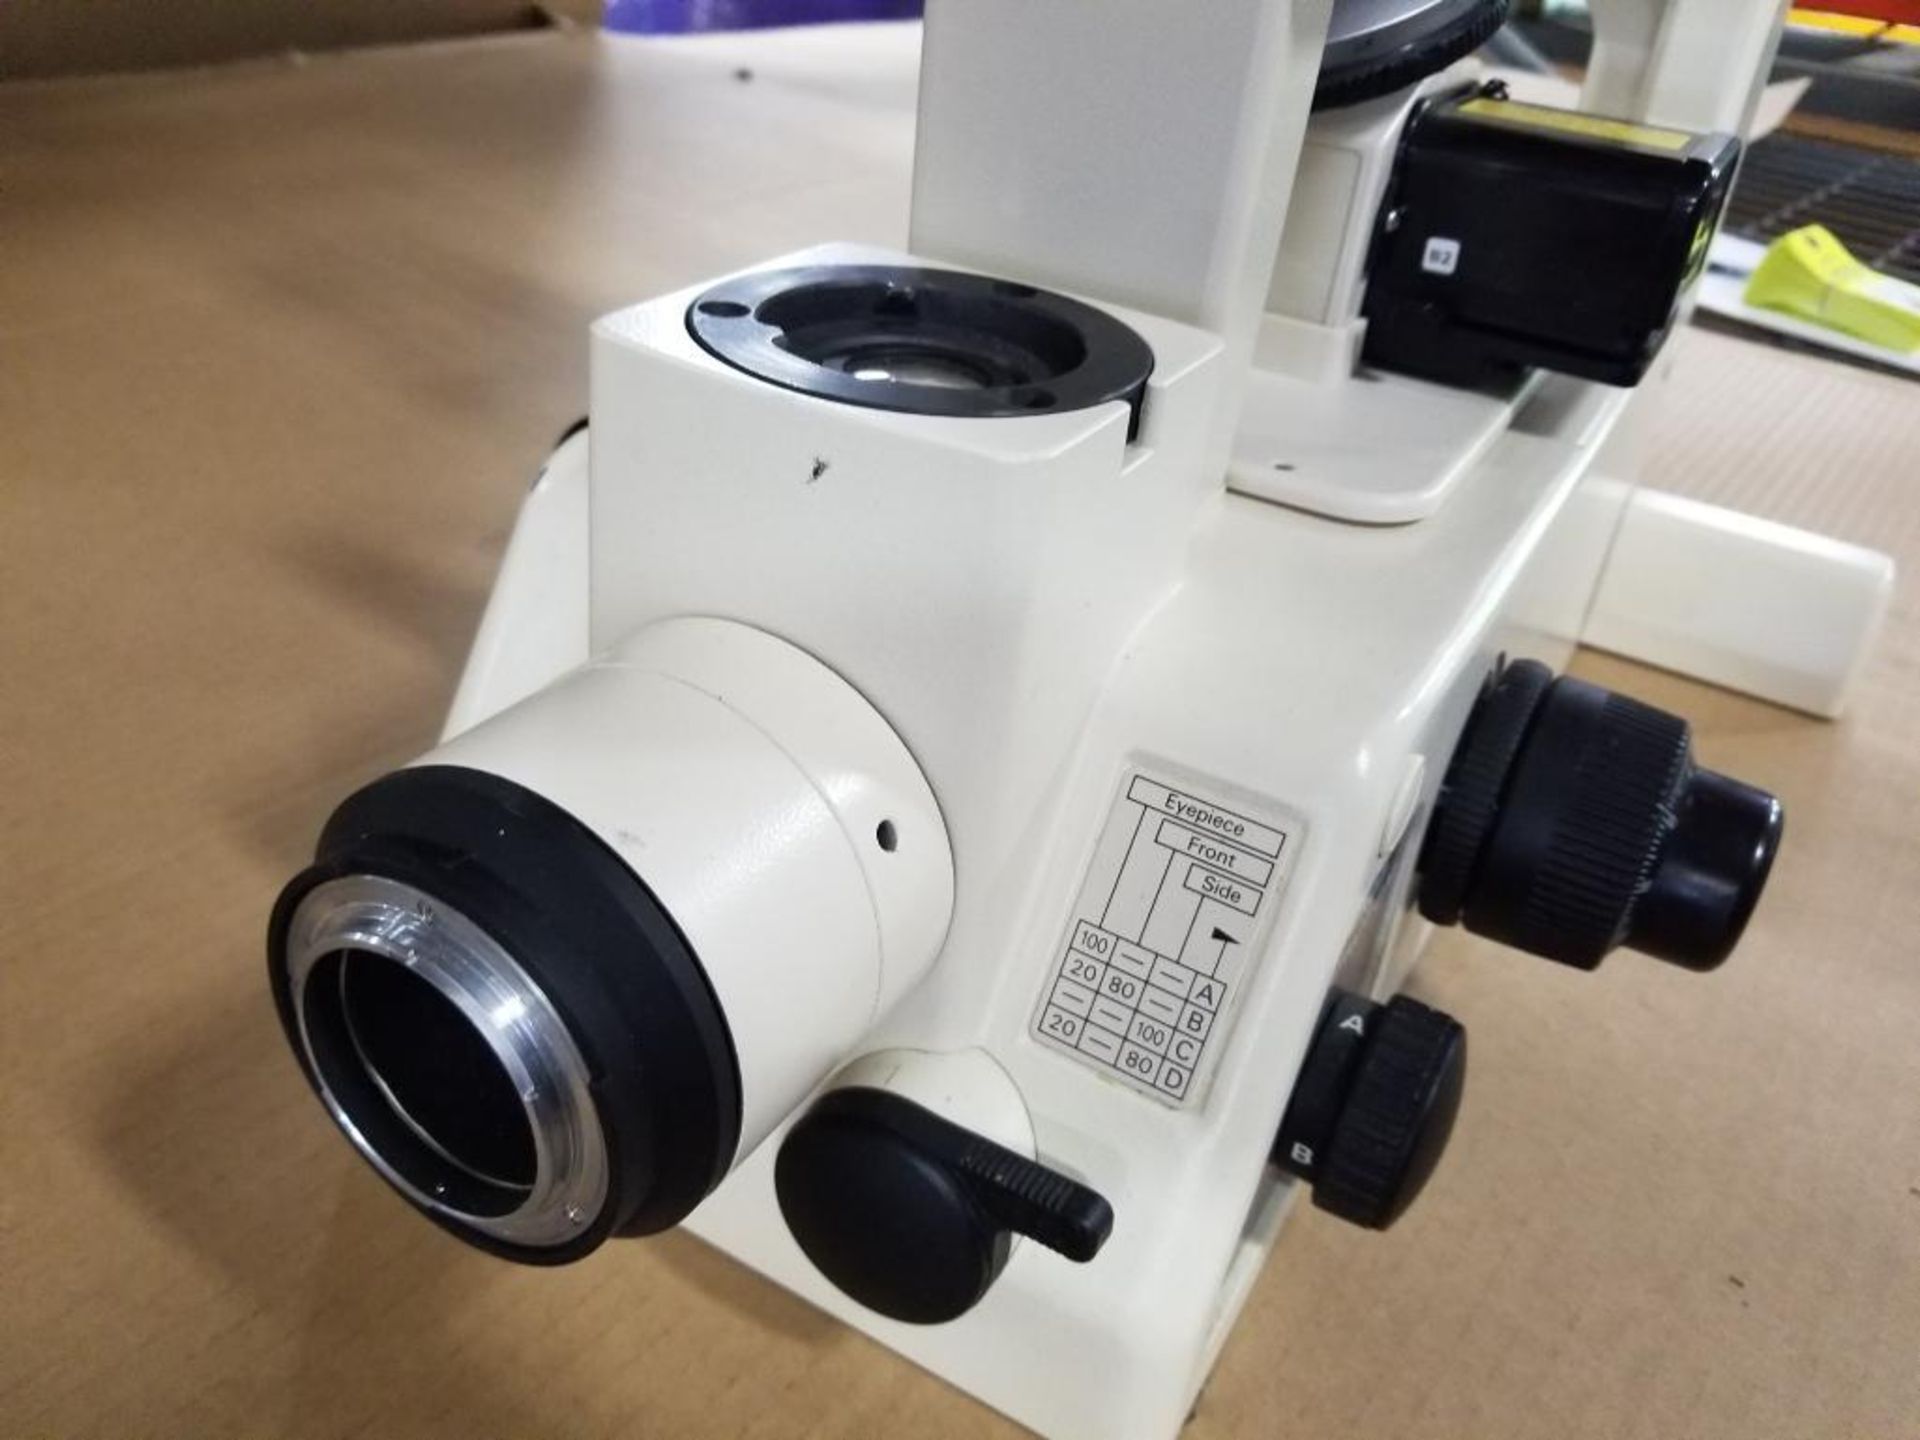 Nikon Diaphot 300 inverted fluorescent phase contrast microscope. S/N:310094 - Image 11 of 11